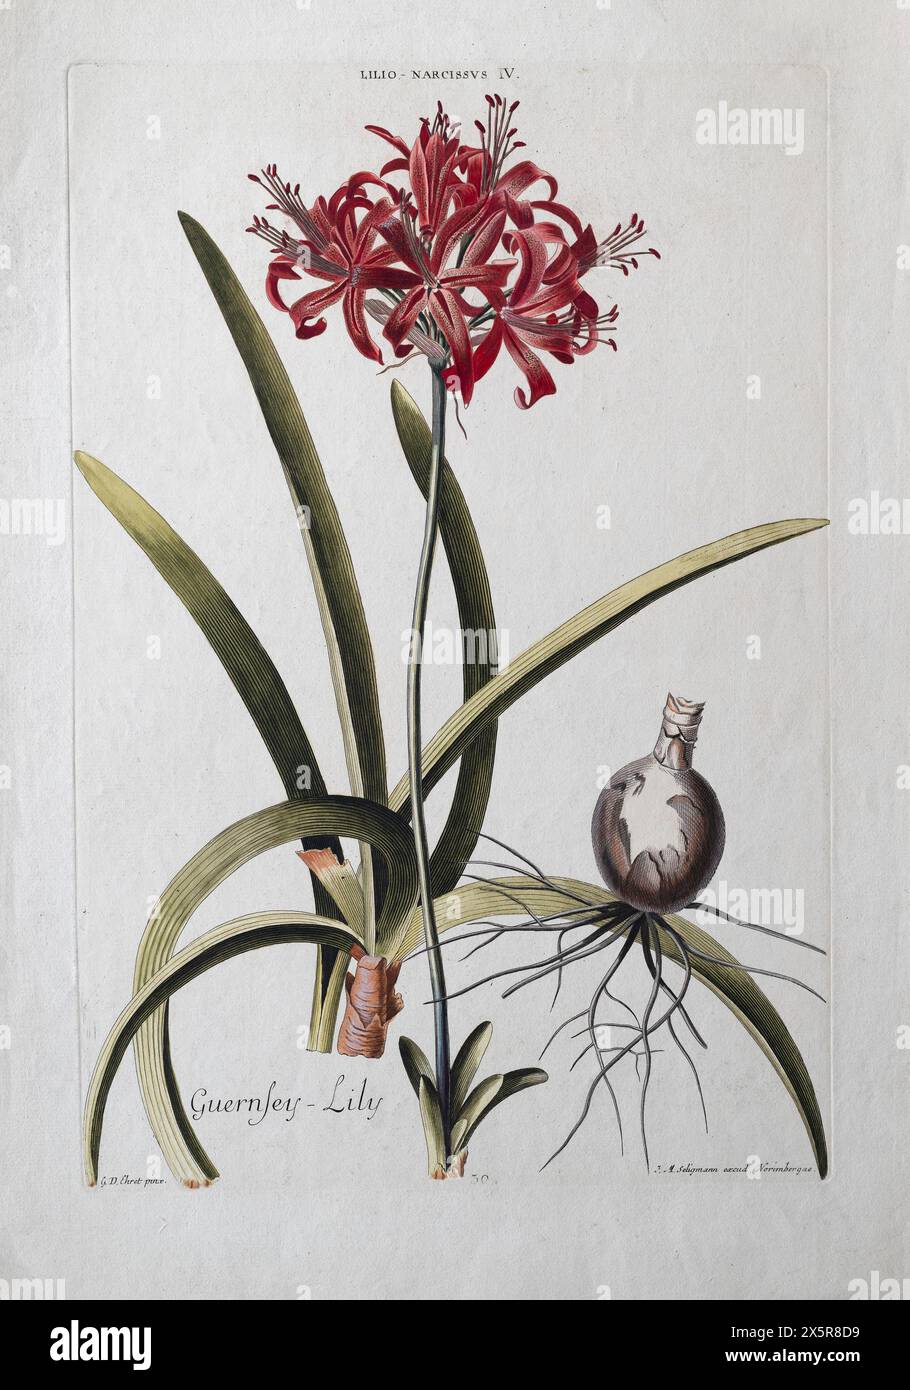 Narcissus or Guernsey Lily, old coloured copperplate engraving by J. M. Seligmann after Georg Ehret from the Hortus Nitidissimis, Nuremberg 1768, 1786 Stock Photo